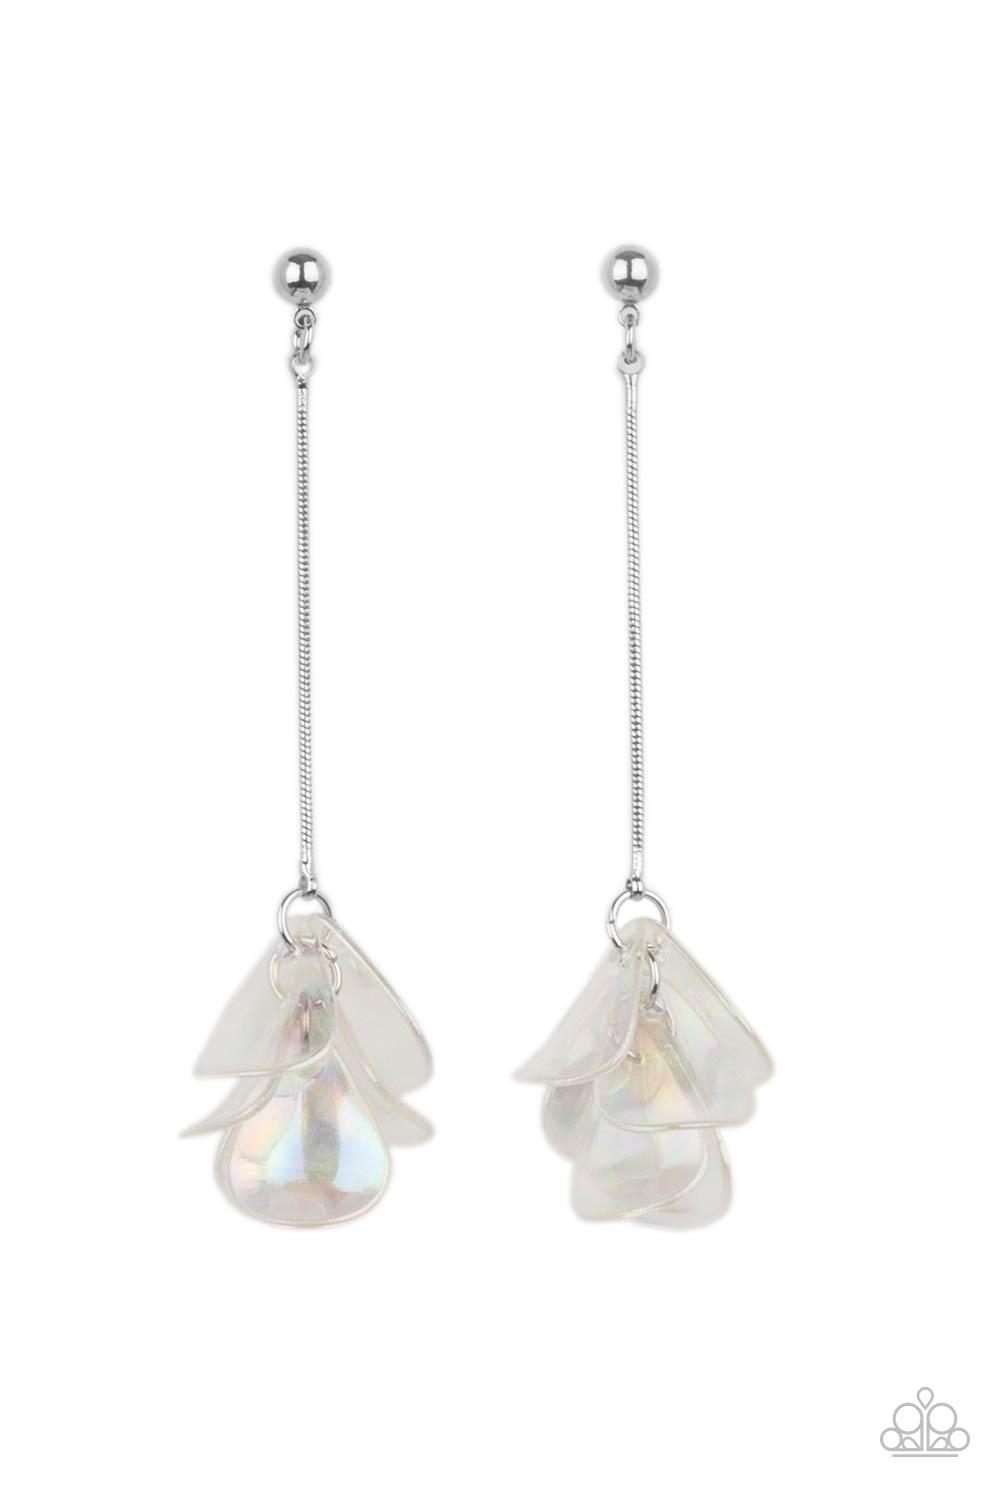 Paparazzi Accessories Keep Them In Suspense - Multi Iridescent acrylic petals delicately cluster at the bottom of a shiny silver chain, creating an ethereal tassel. Earring attaches to a standard post fitting. Sold as one pair of post earrings. Jewelry